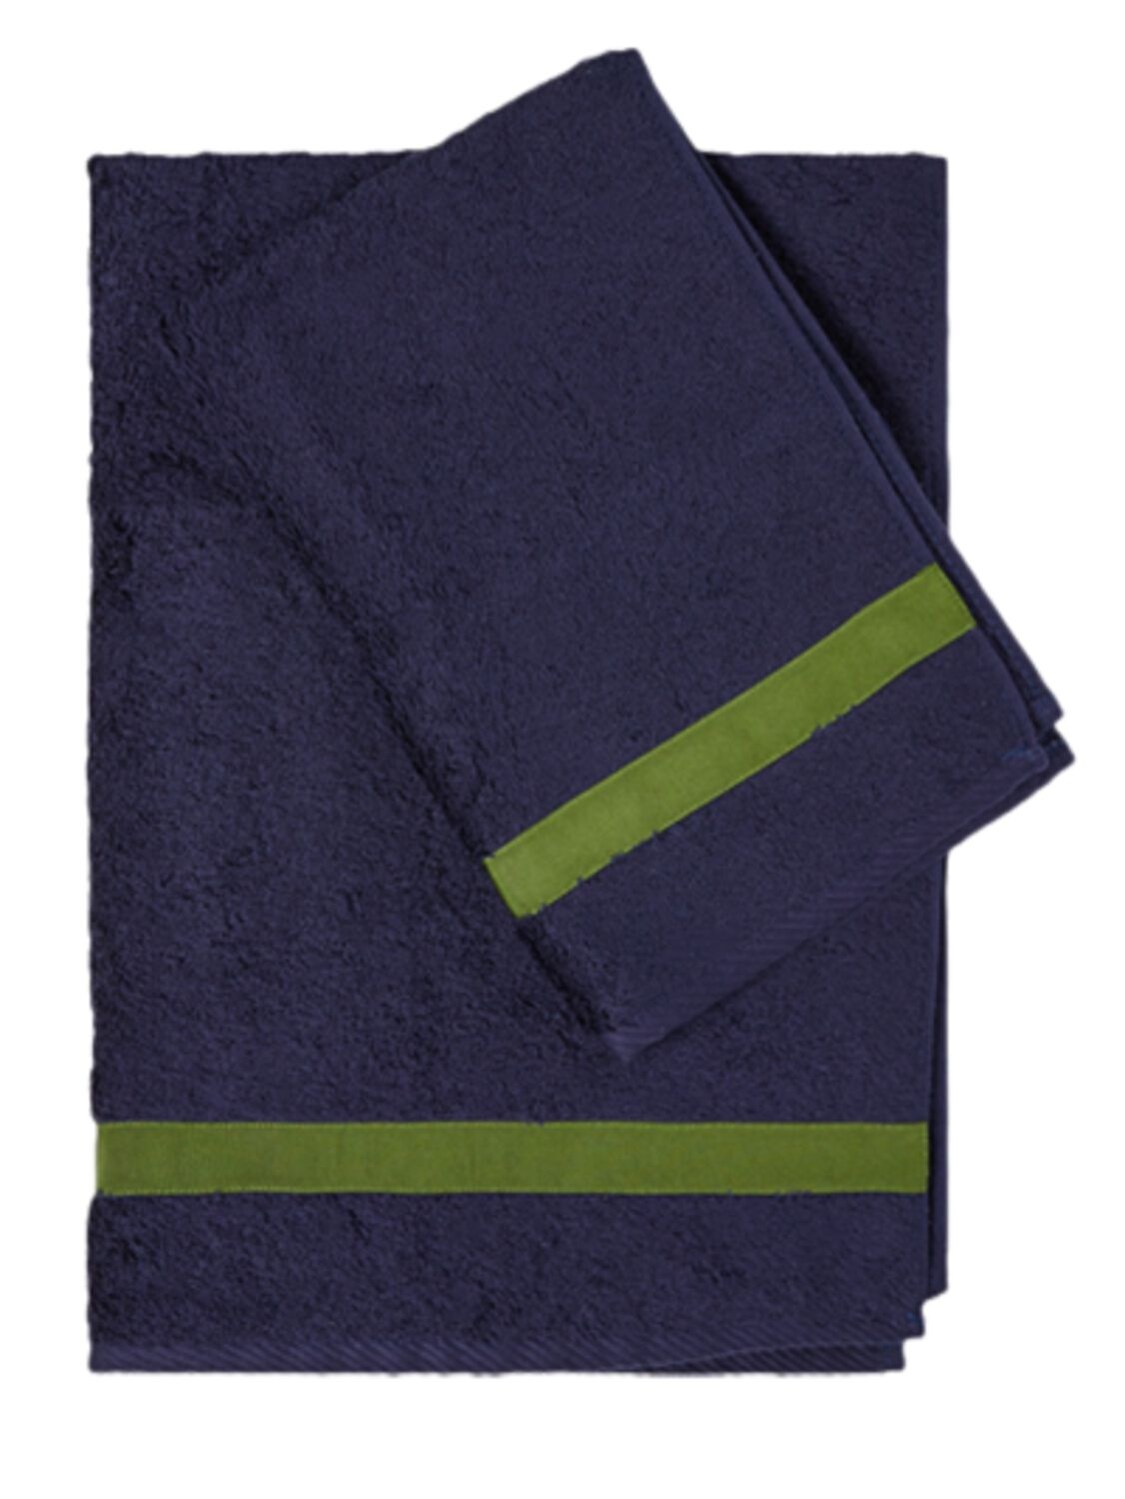 Alessandro Di Marco Set Of 2 Cotton Terrycloth Towels In Blue,green